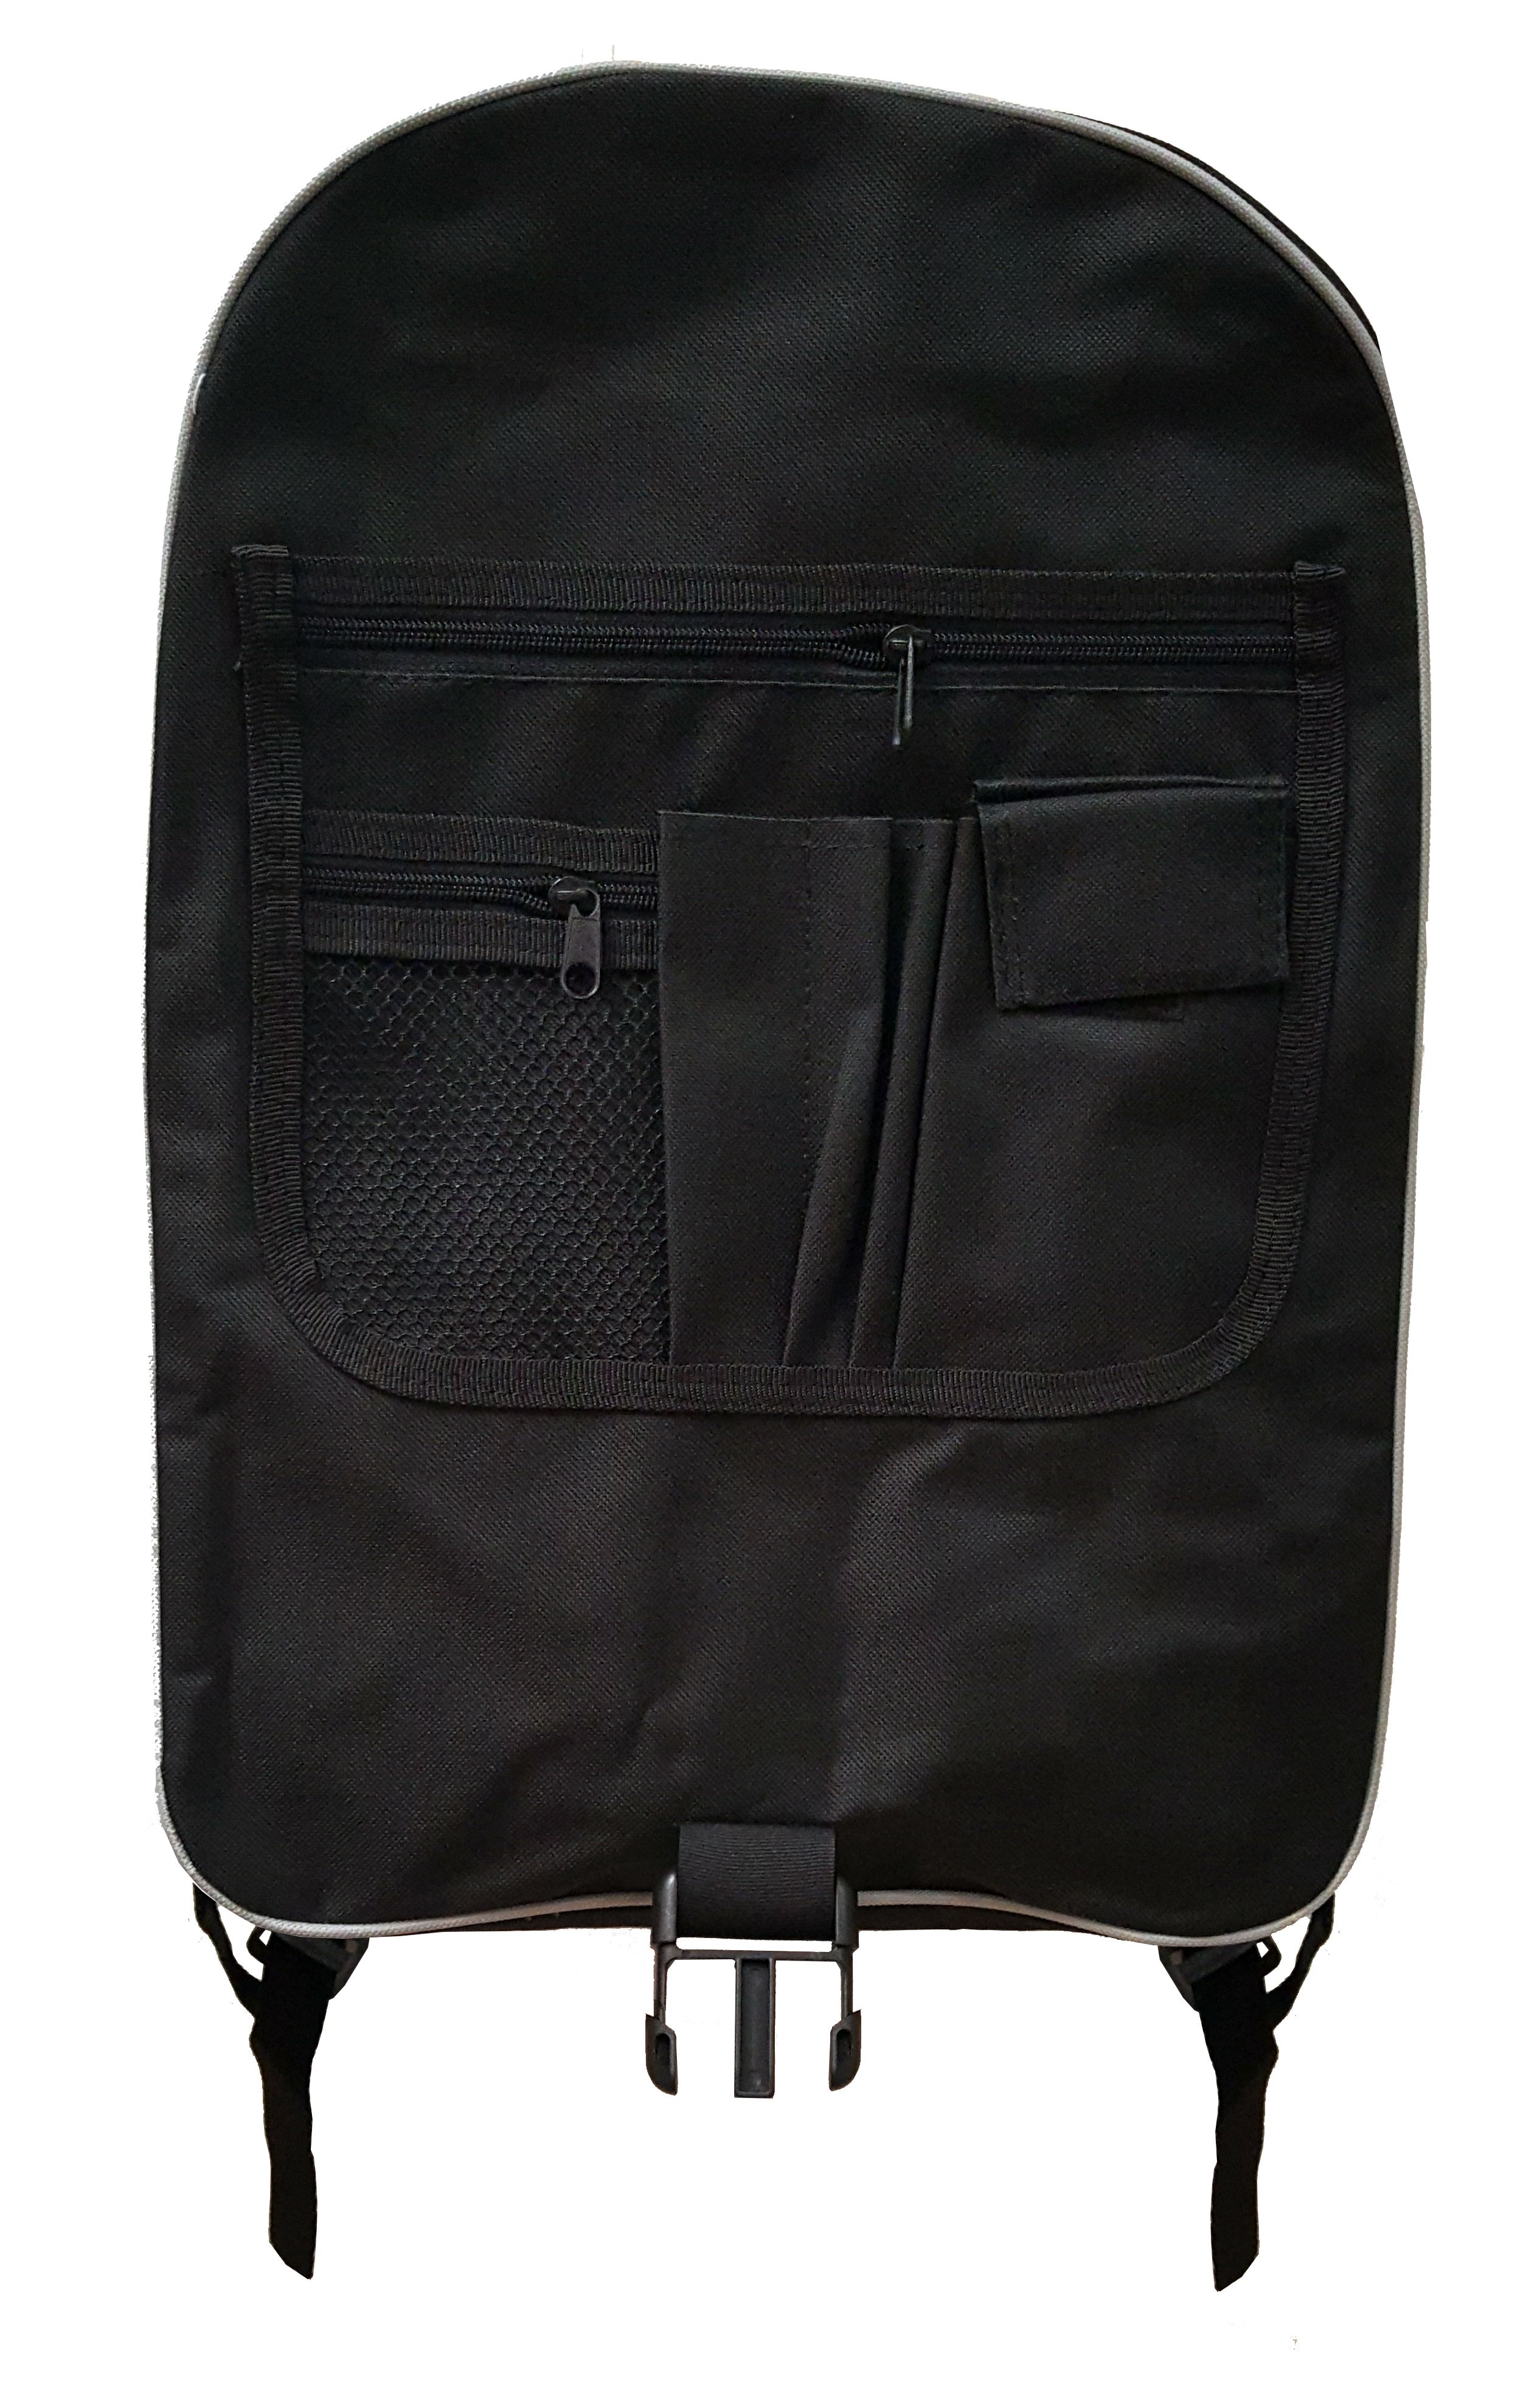 Collection of School Backpacks in Black - Choose From 28 Styles - image 2 of 3